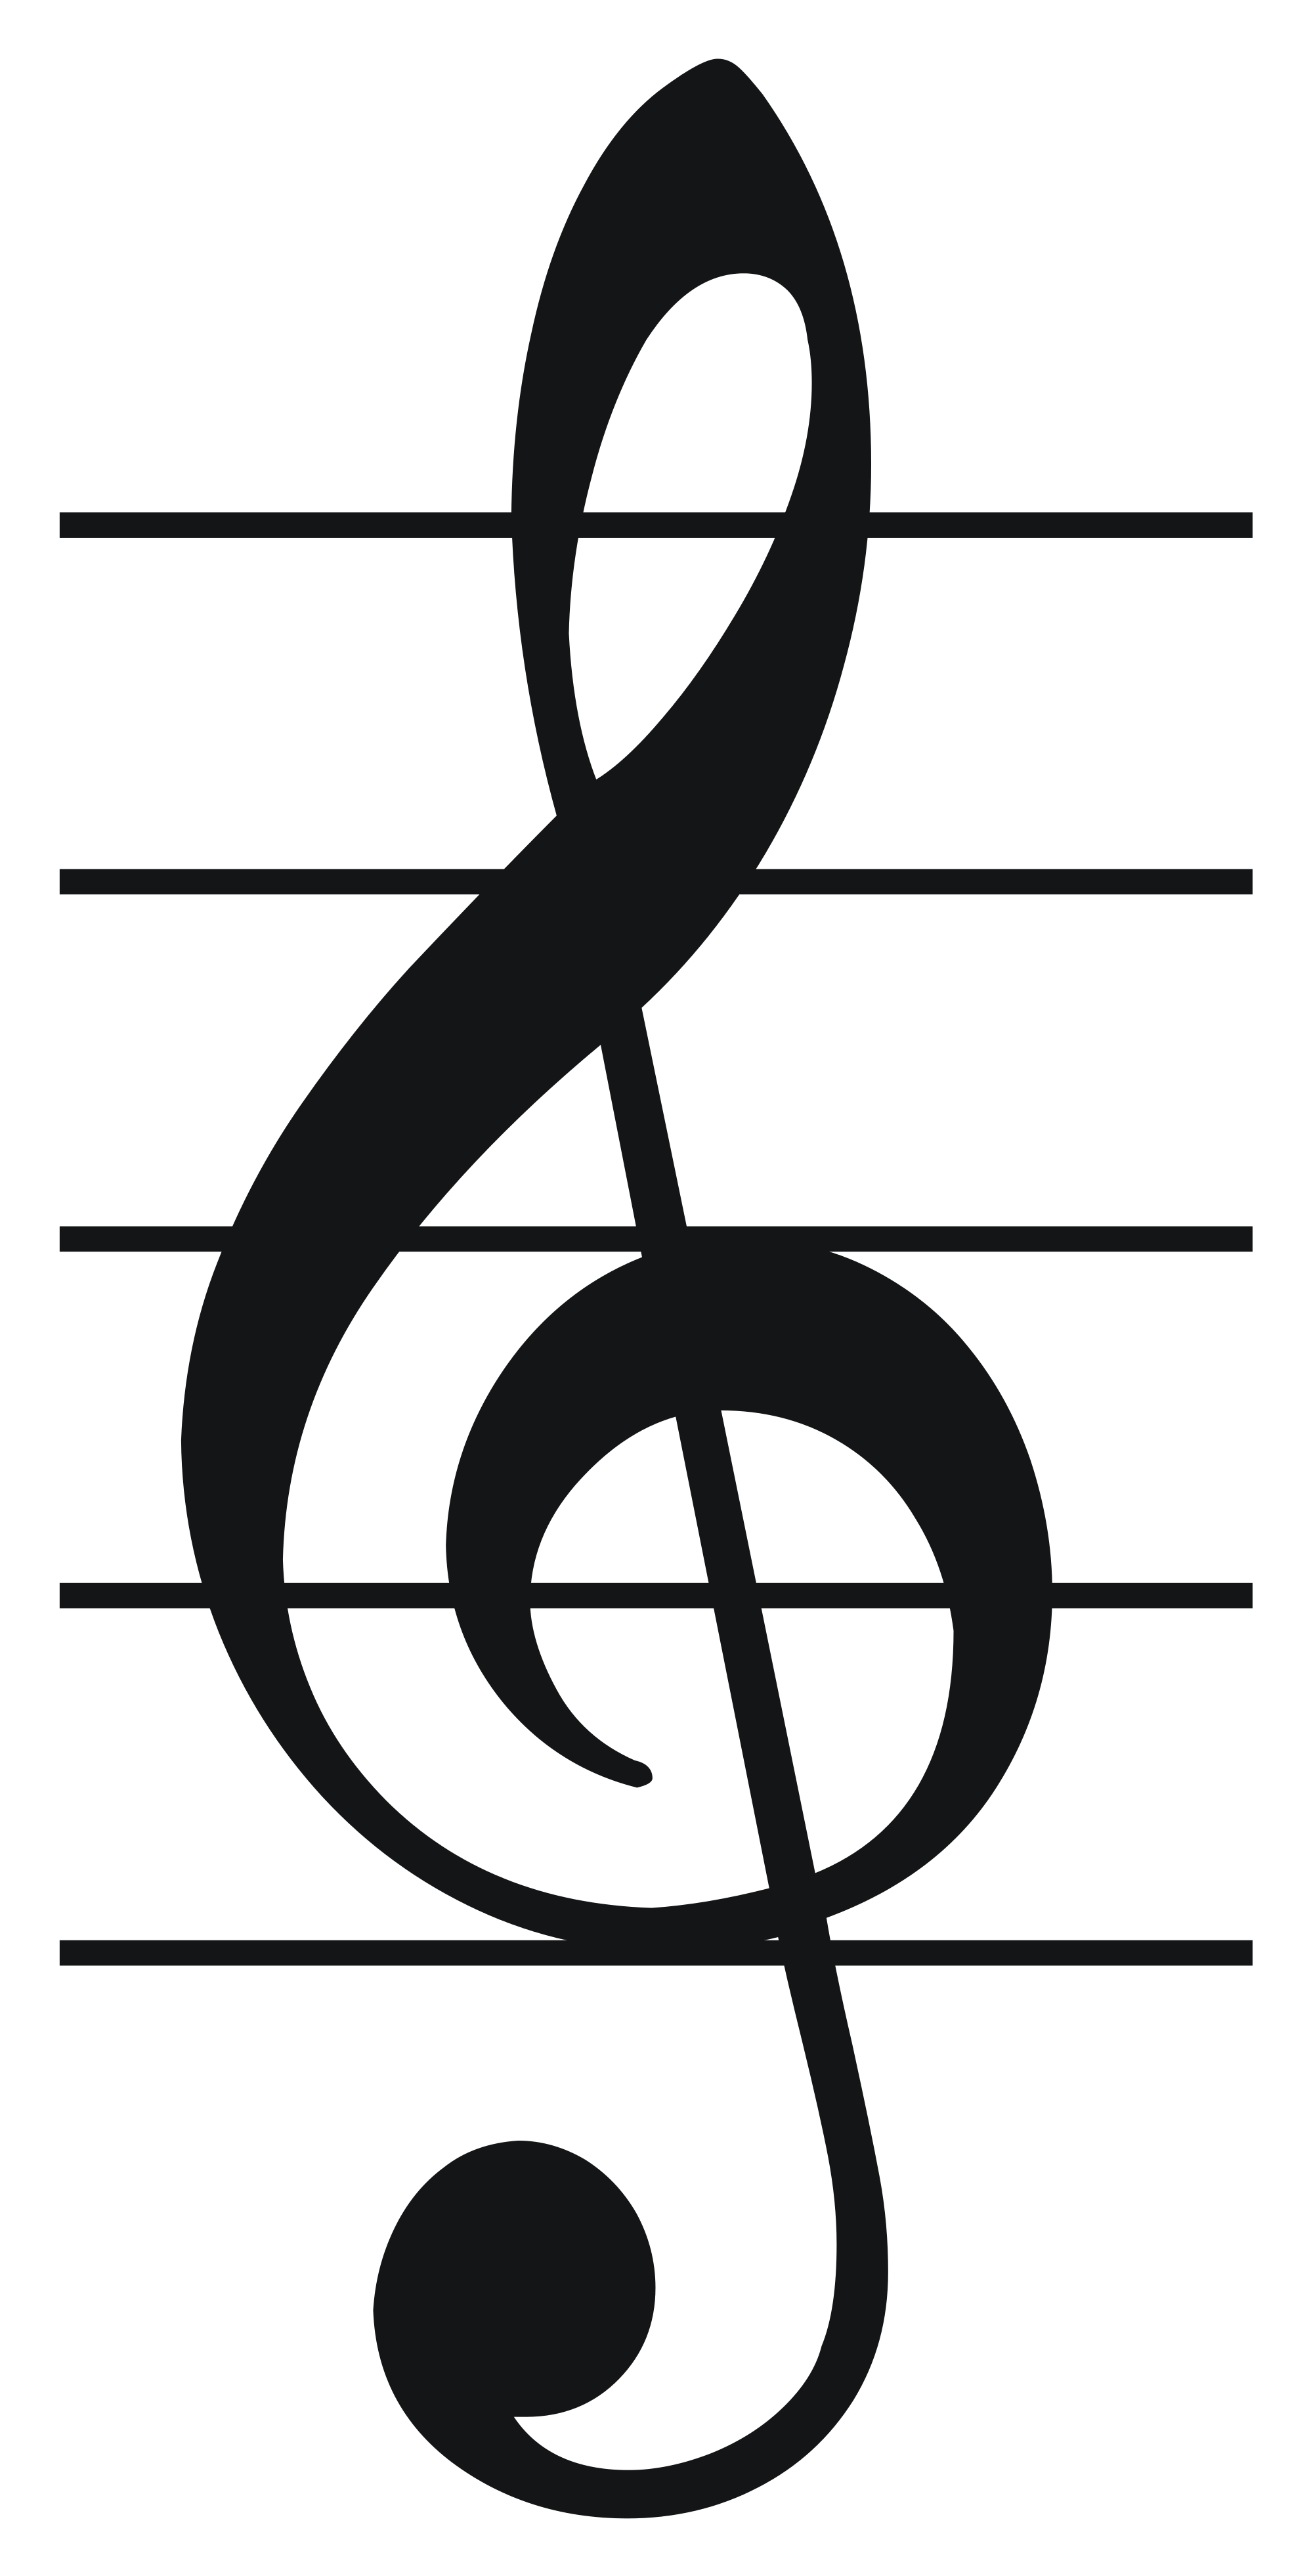 free-photo-treble-clef-clef-music-musical-free-download-jooinn